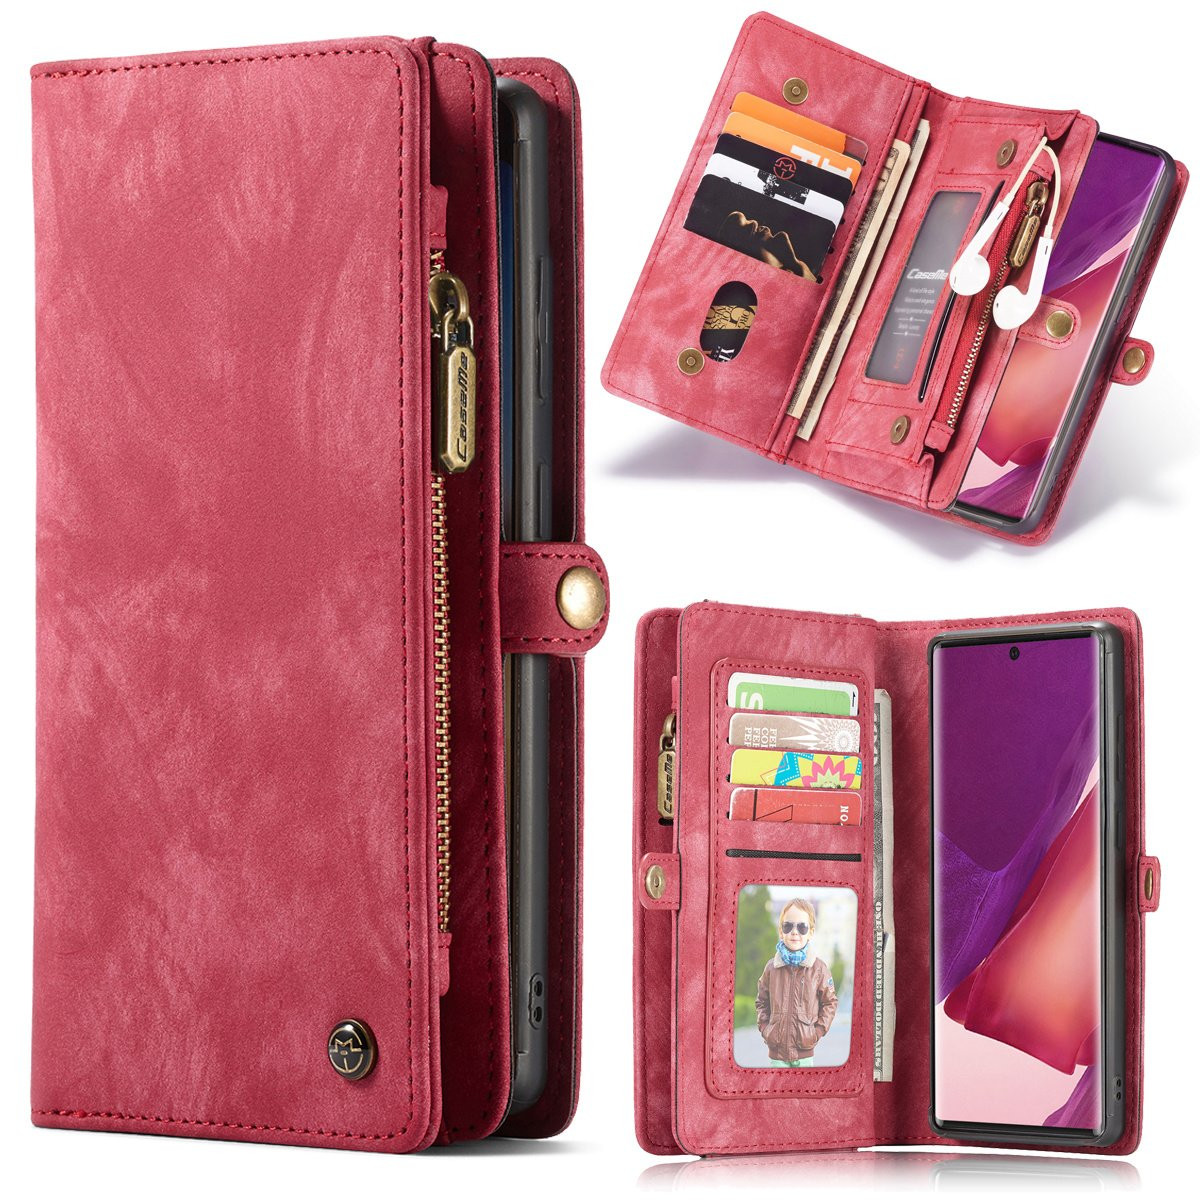 Caseme - vintage 2 in 1 portemonnee hoes - Samsung Galaxy Note 20 Ultra - Rood